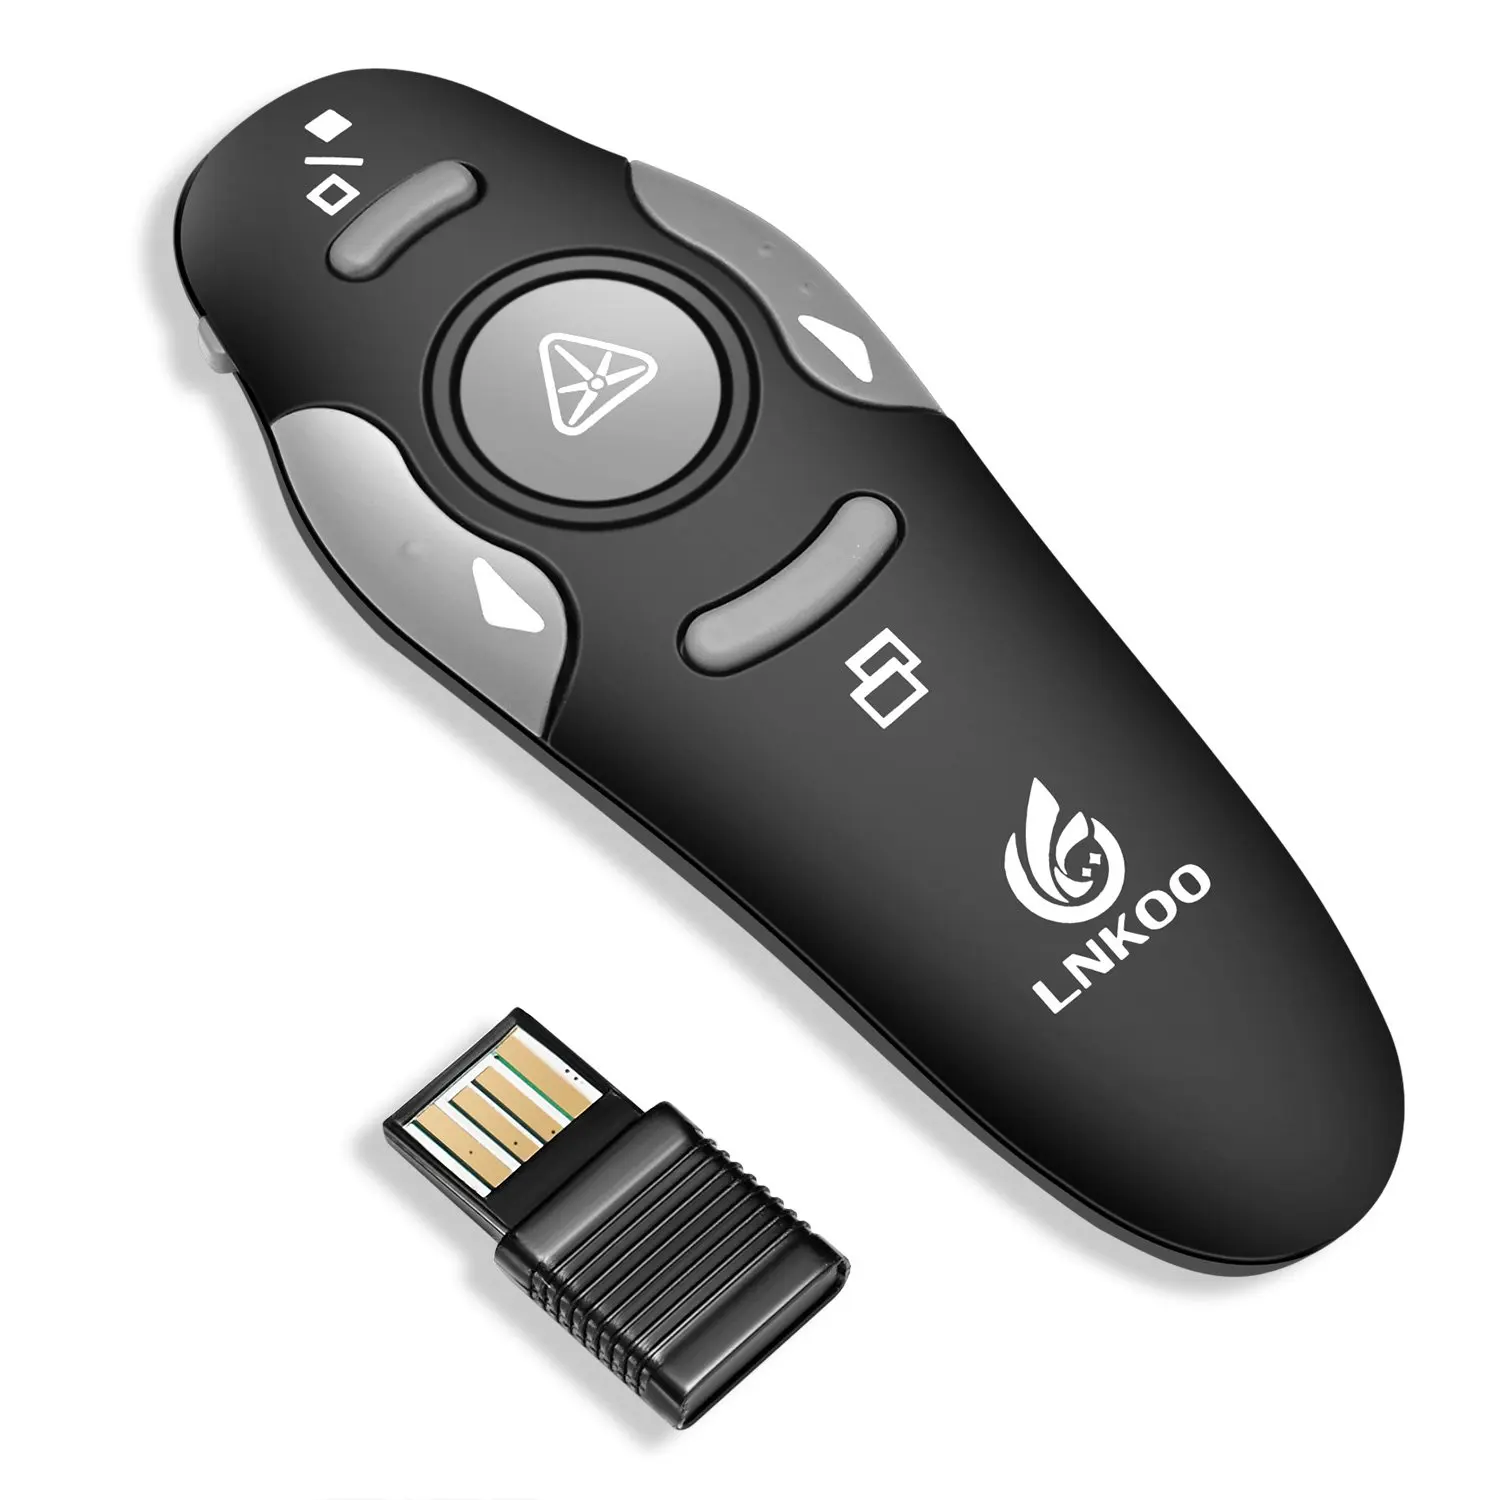 mouse clicker online